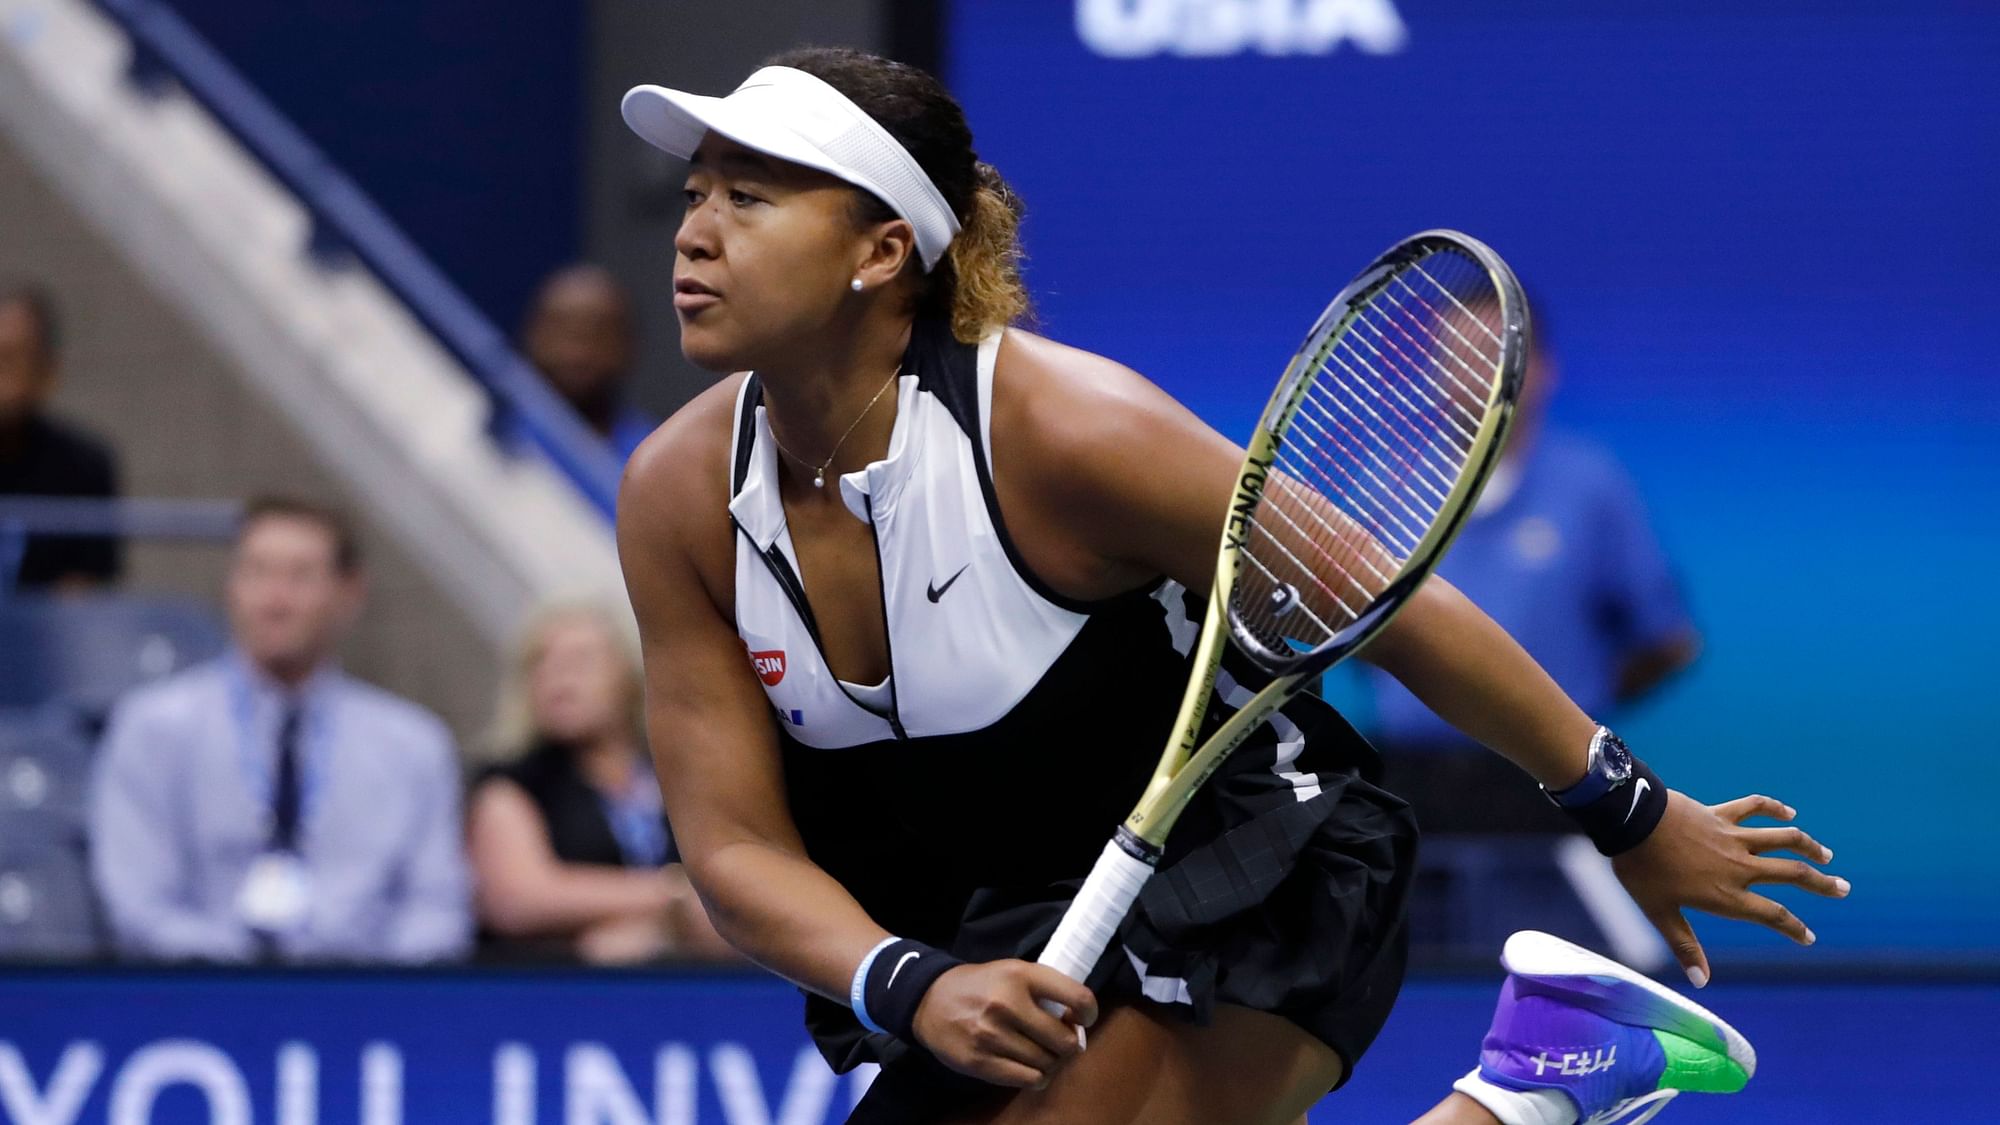 Defending champion Naomi Osaka was eliminated from the US Open in the fourth round.